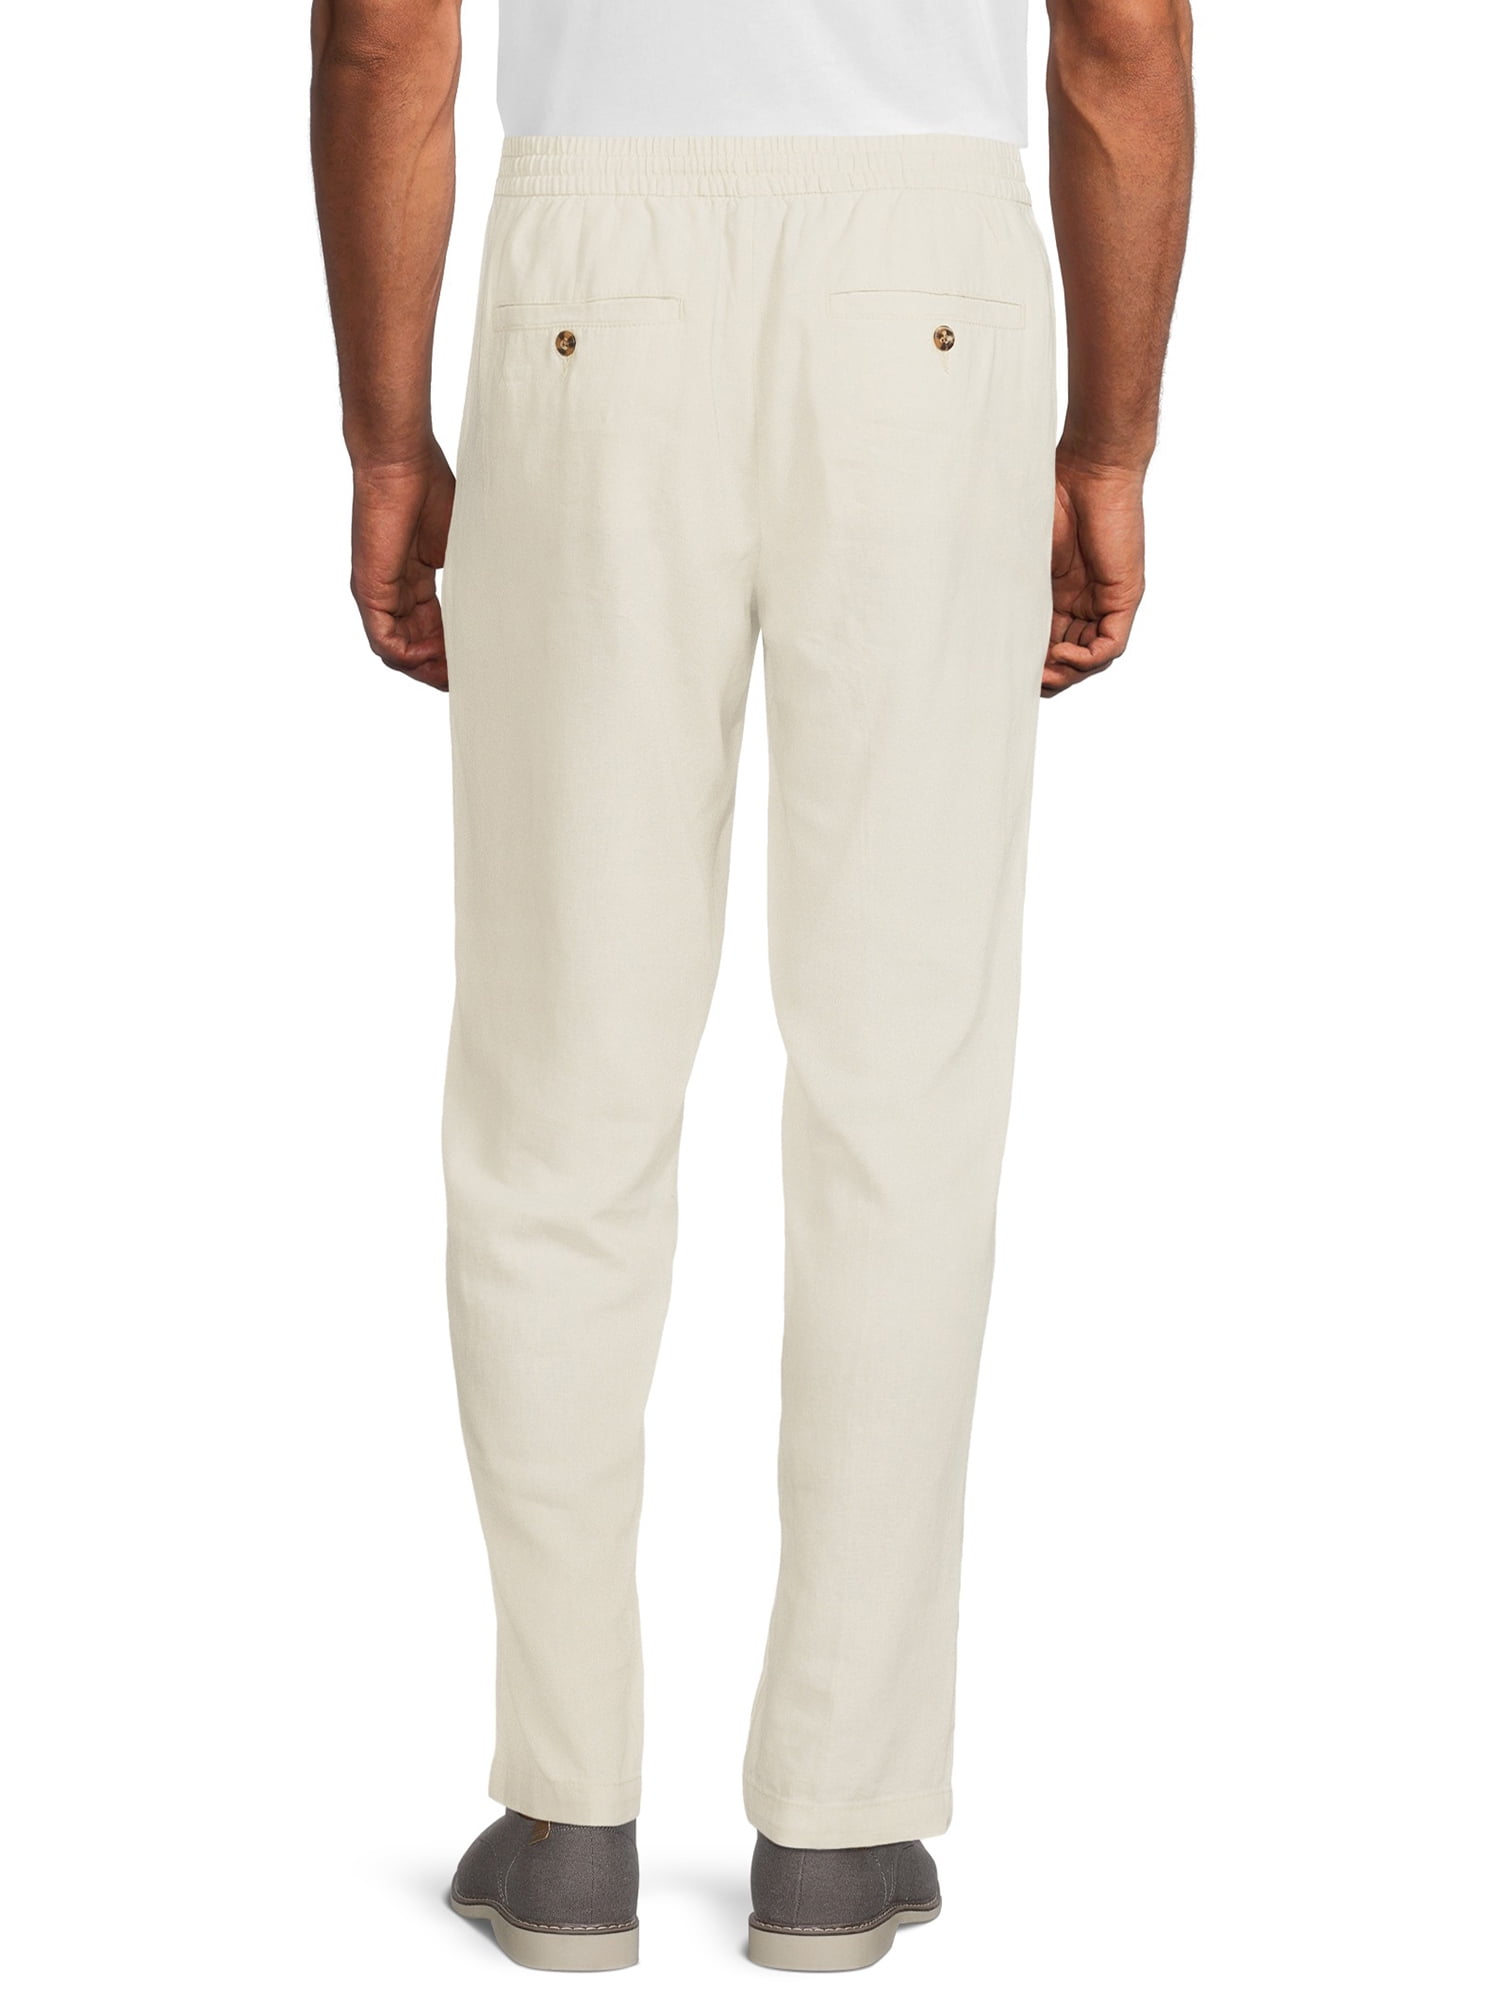 Buy AS ONE Mens Pants XL Size Hem Mouth Straight  Room Temperature Type  White FX70966 Online in India at Best Prices